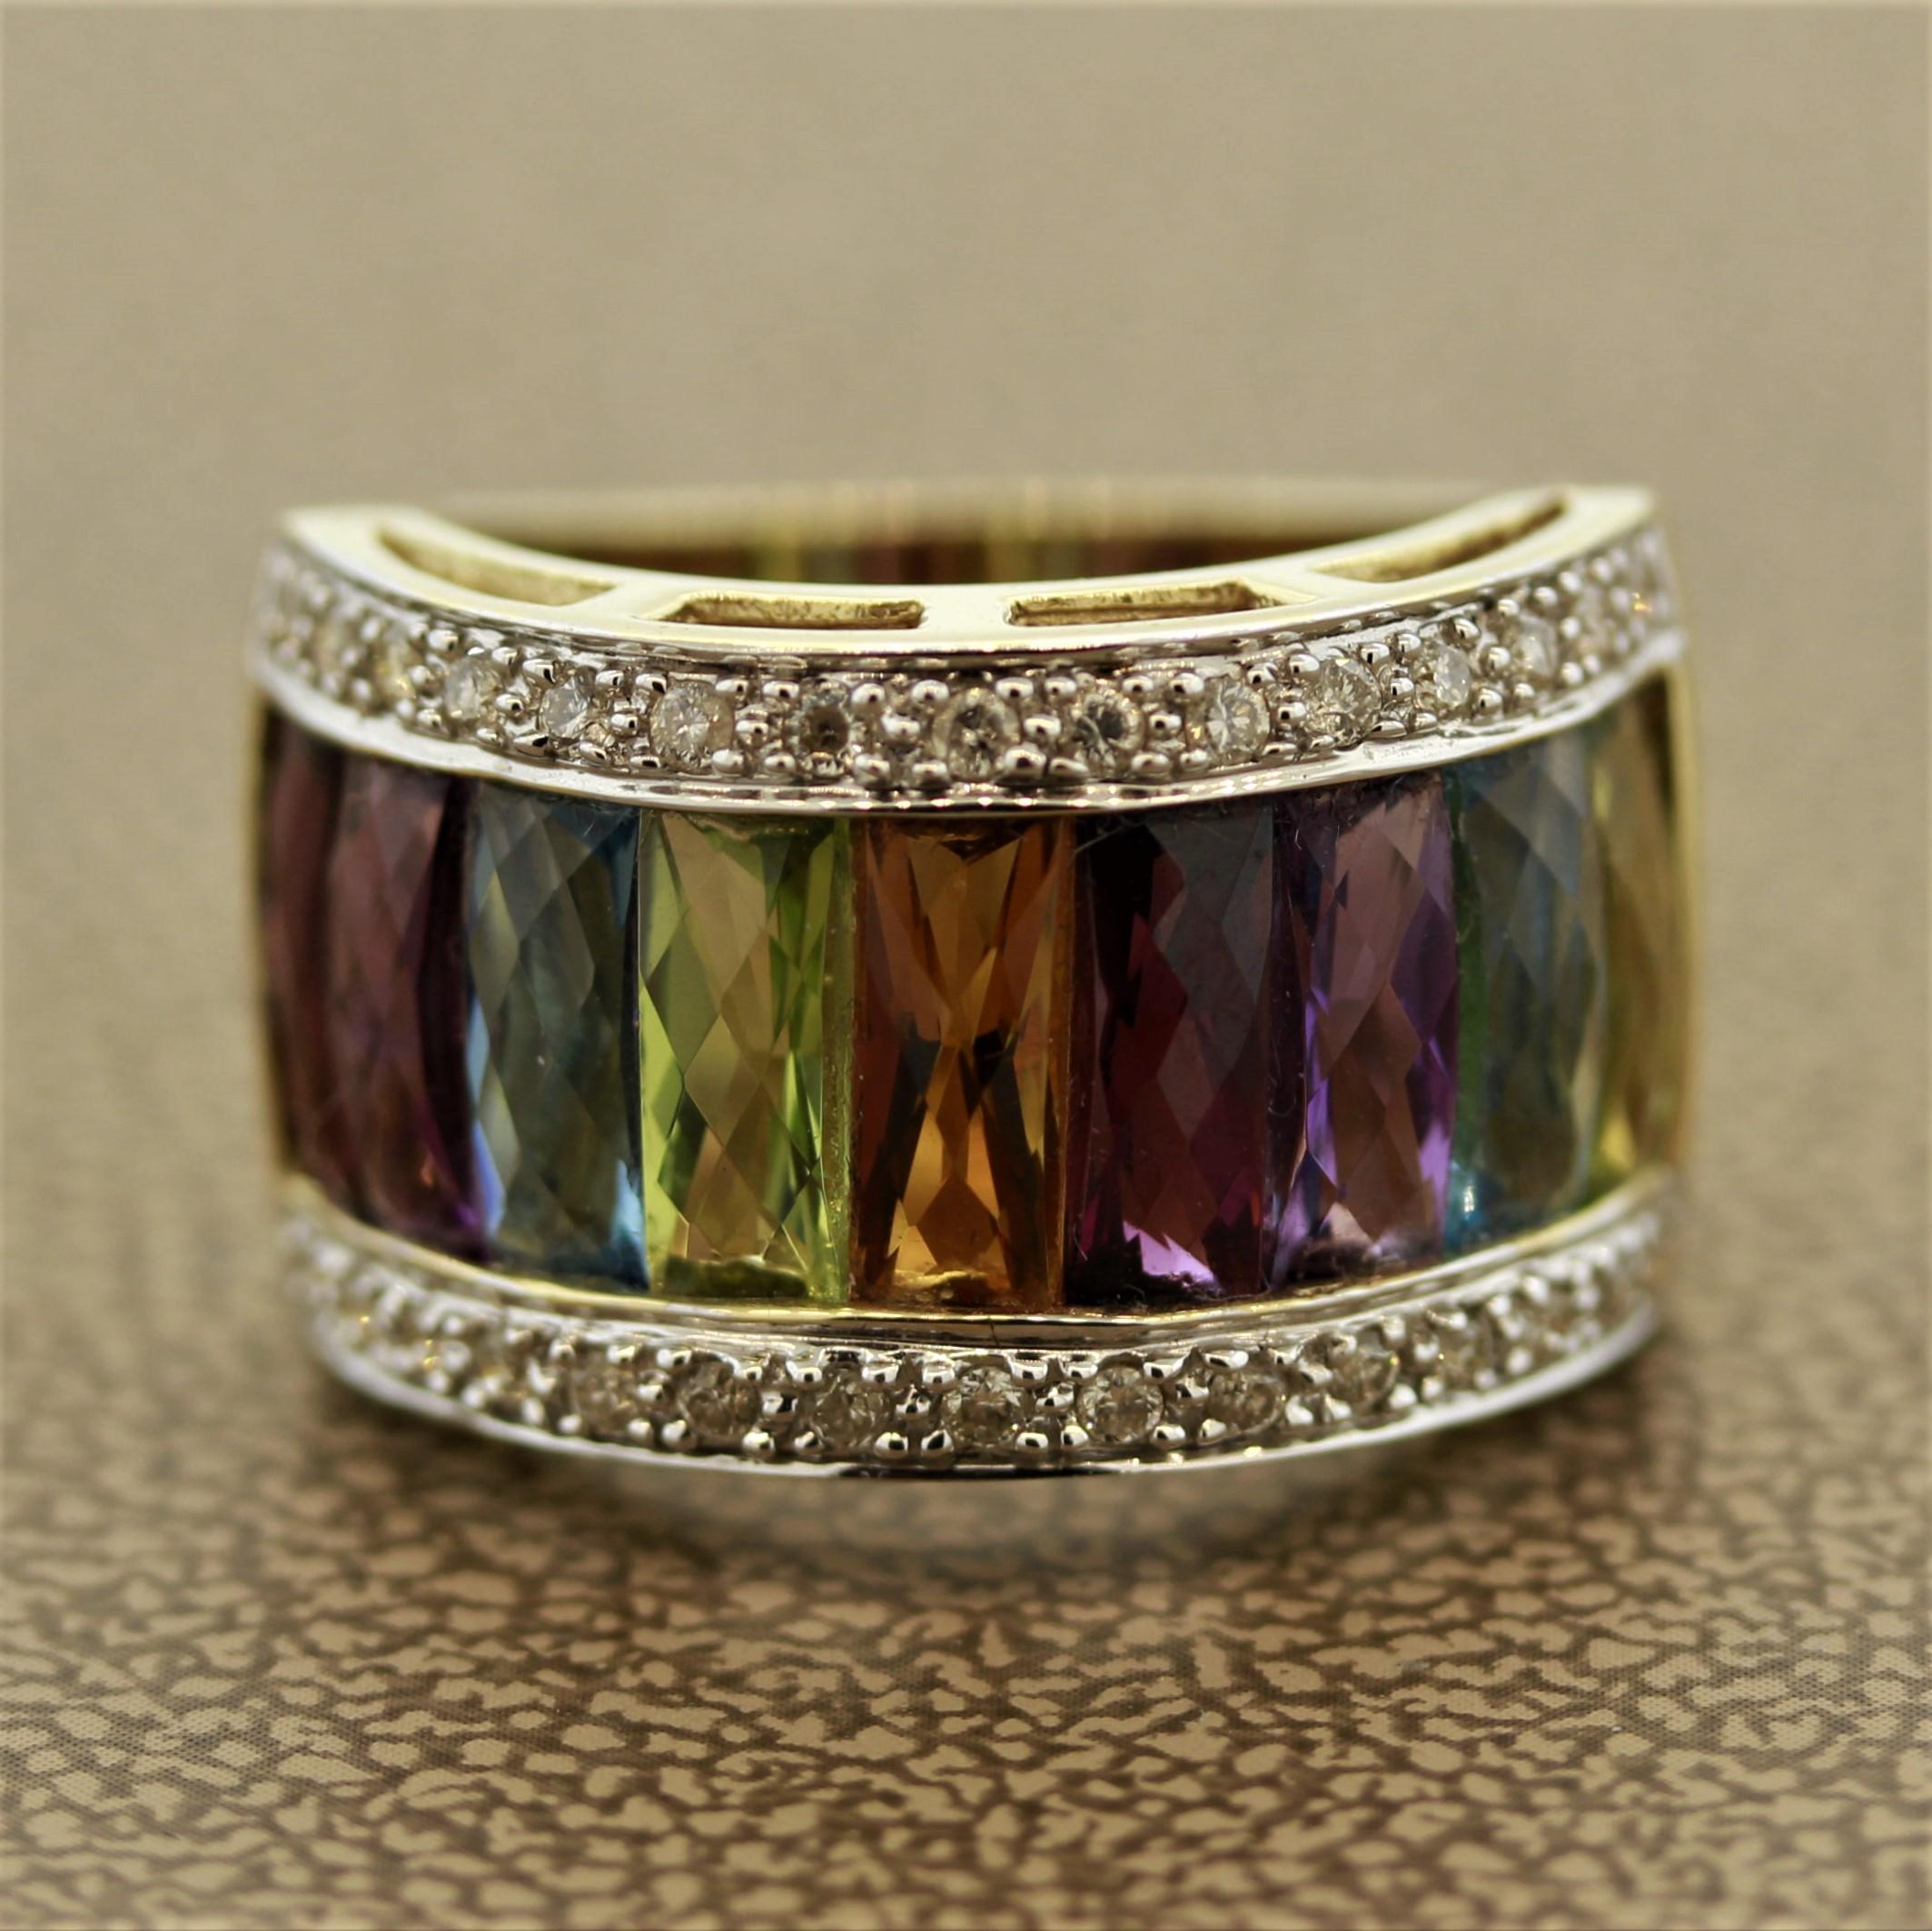 A bright and colorful wide gold band ring. It features approximately 6.50 carats of colored stones and diamonds which include amethyst, garnet, peridot and citrine. Made in 14k yellow gold.

Ring Size 6